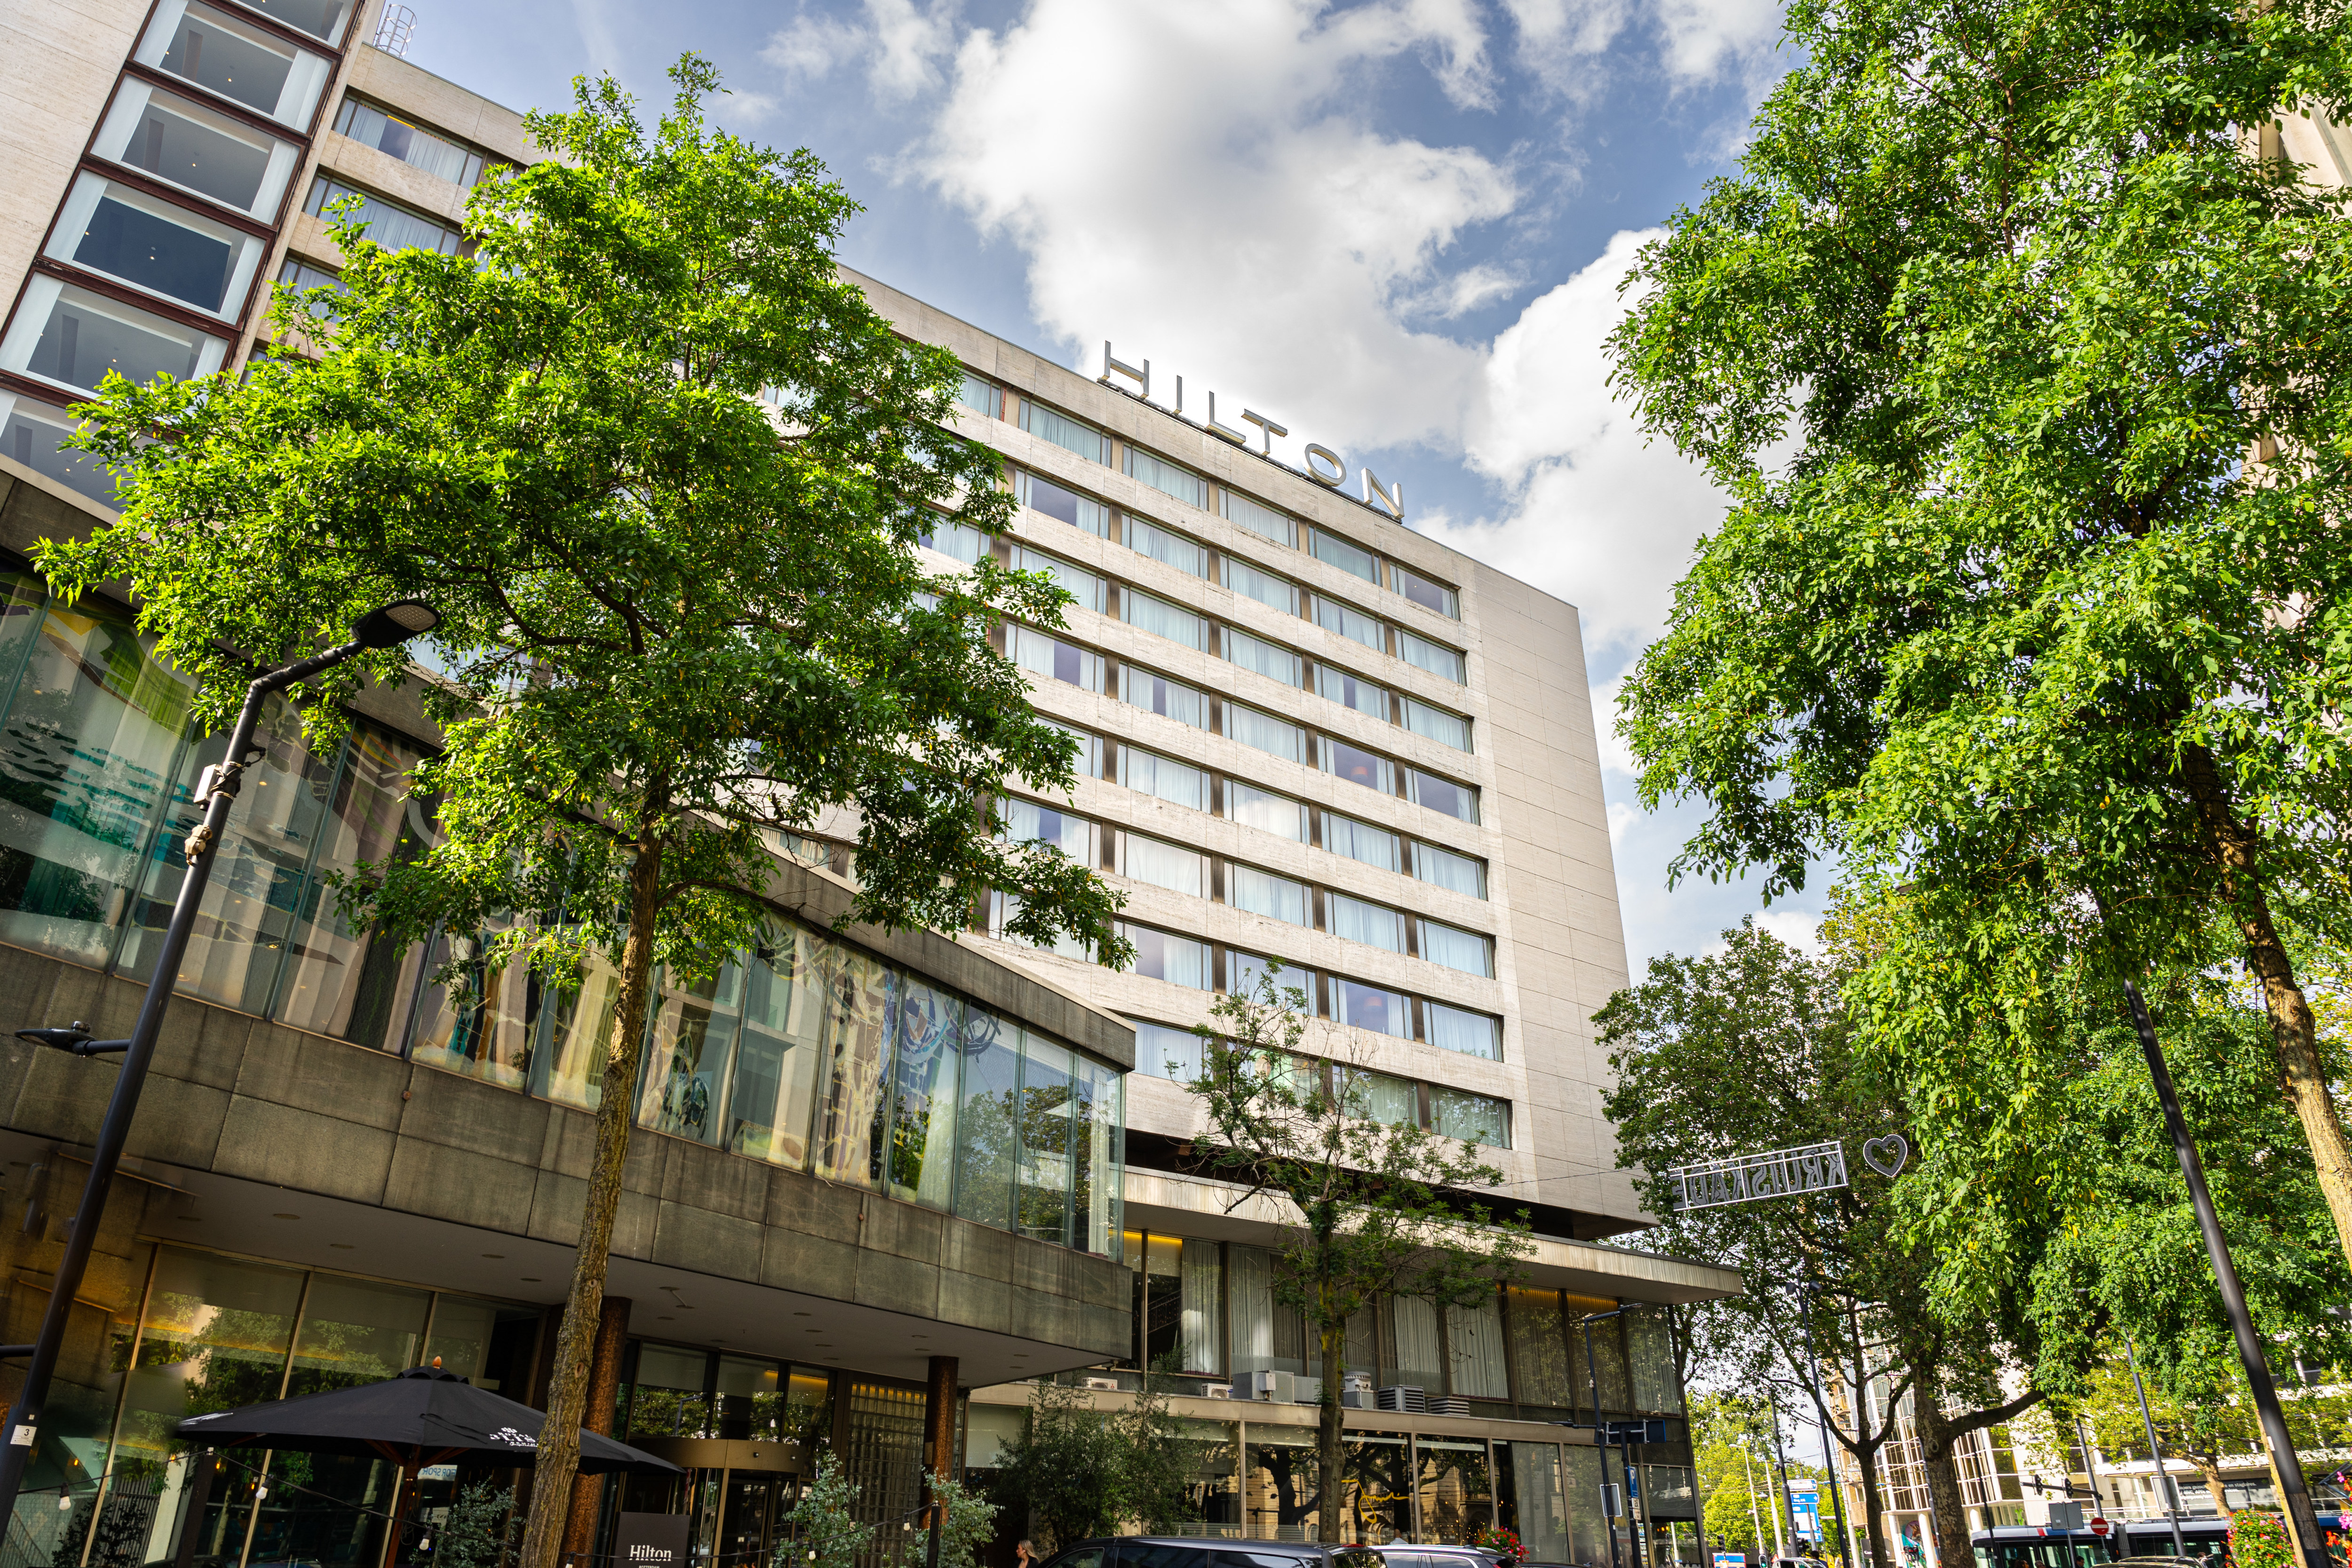 Exterior image of the front of the Hilton Rotterdam hotel